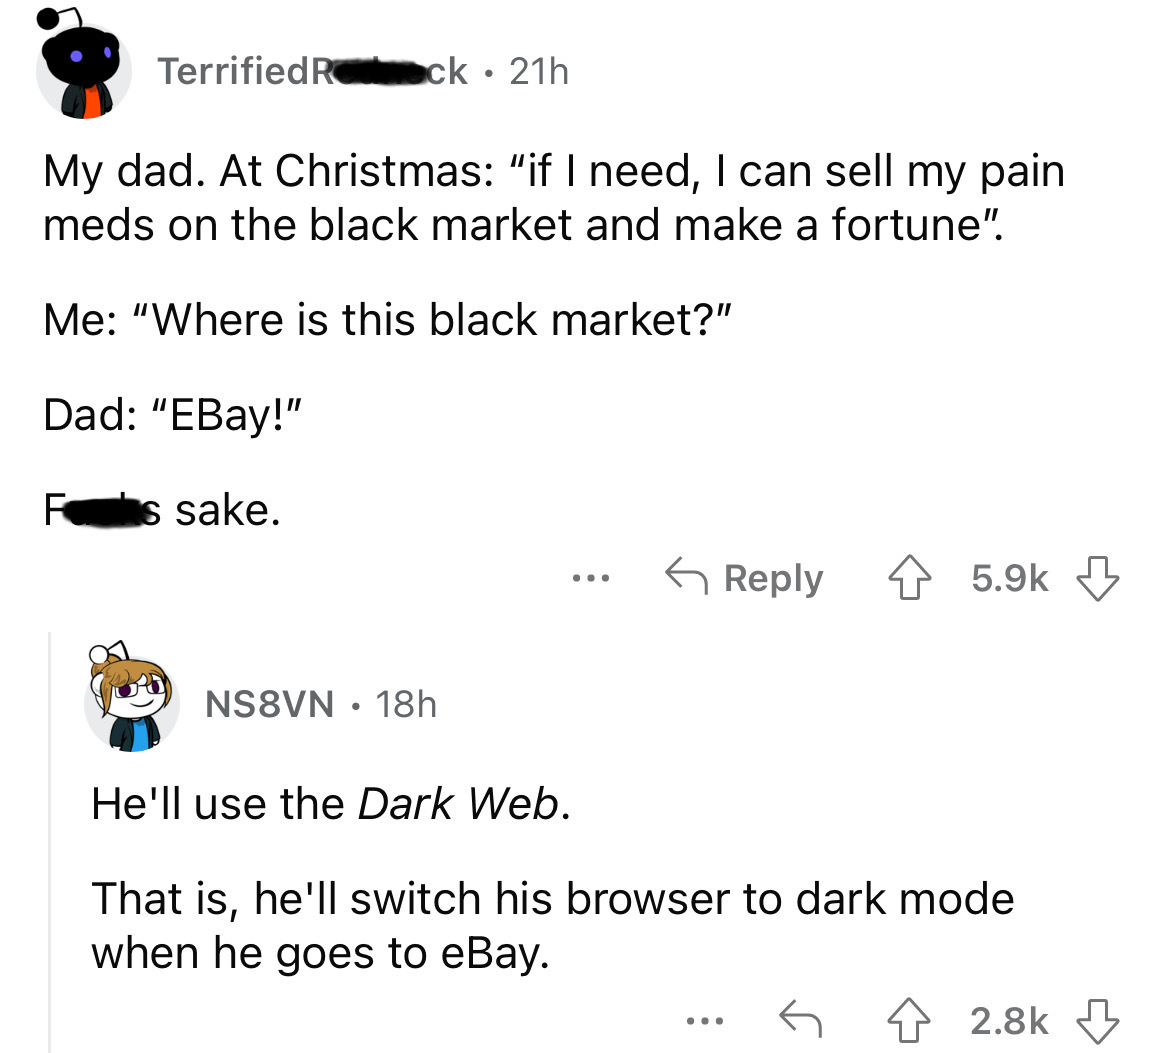 angle - Terrified Rock 21h My dad. At Christmas "if I need, I can sell my pain meds on the black market and make a fortune". Me "Where is this black market?" Dad "EBay!" F s sake. NS8VN 18h ... He'll use the Dark Web. That is, he'll switch his browser to 